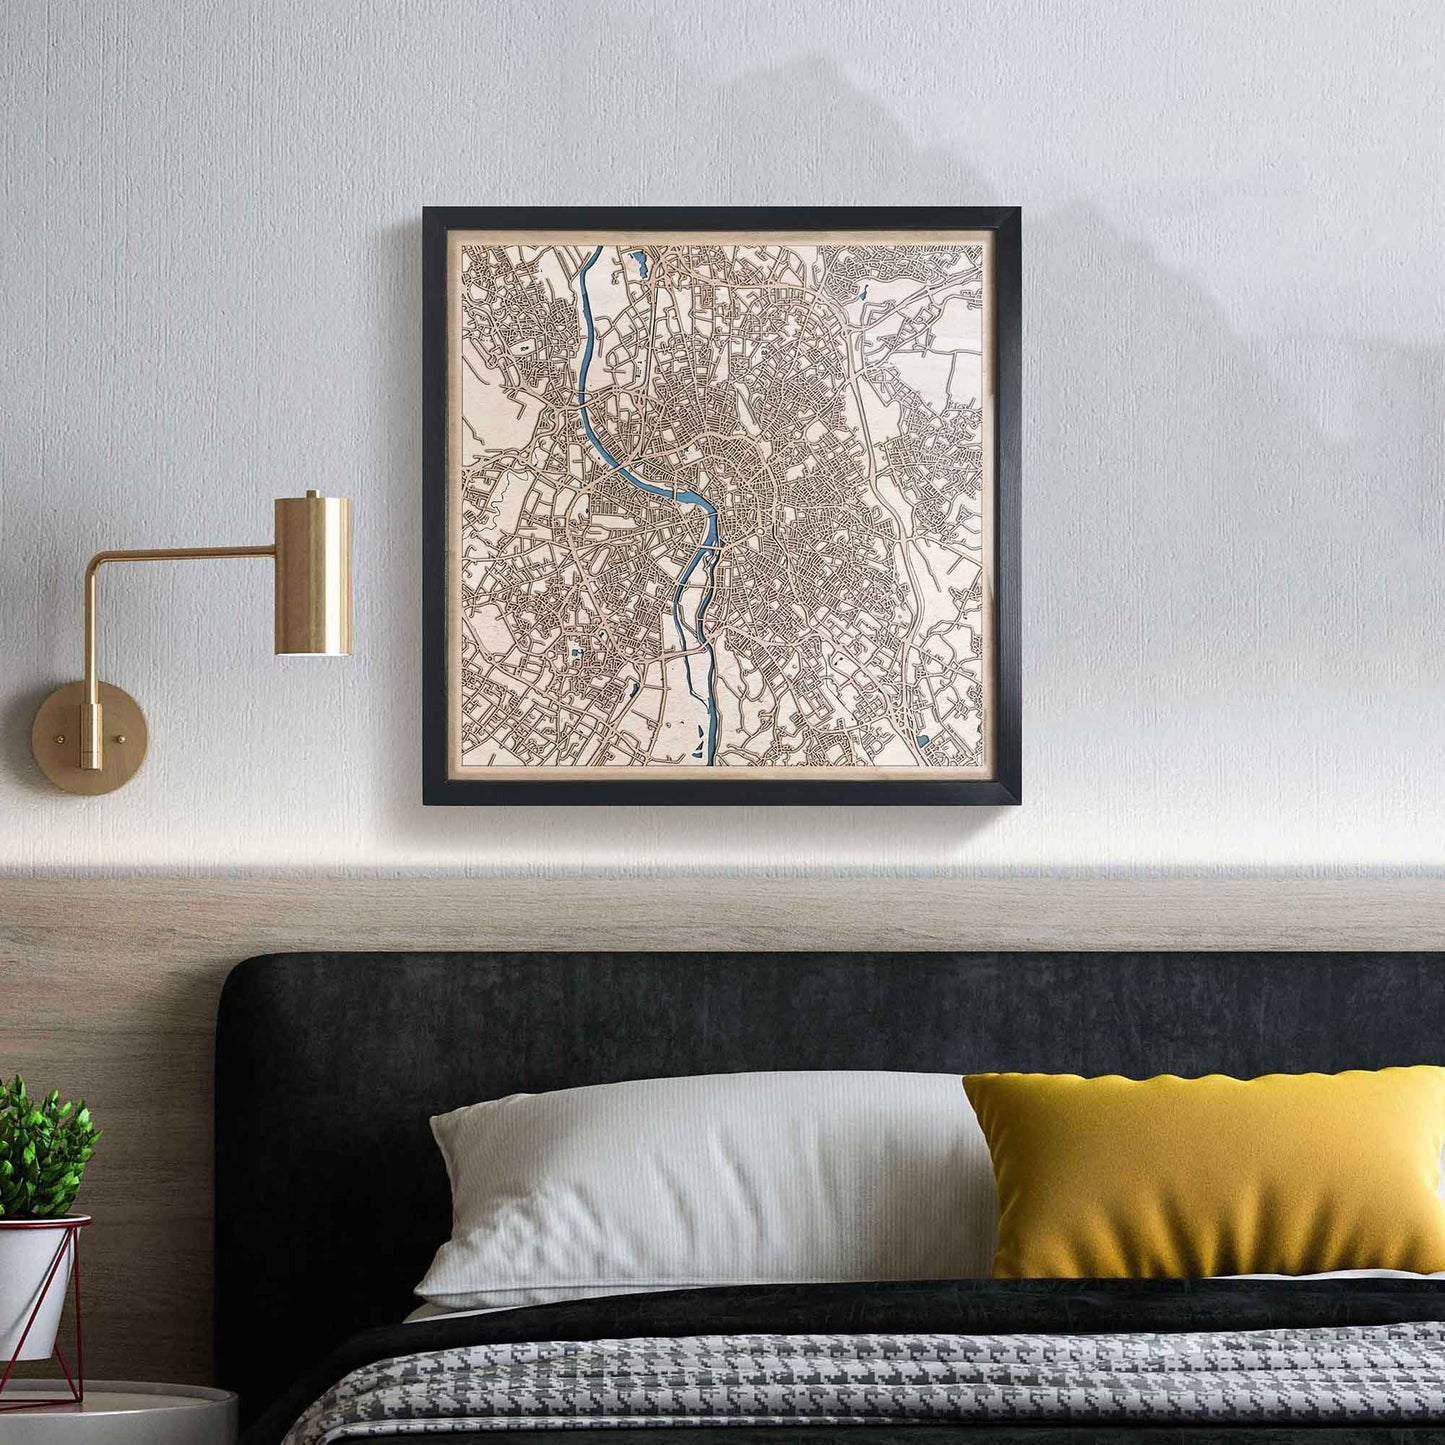 Toulouse Wooden Map by CityWood - Custom Wood Map Art - Unique Laser Cut Engraved - Anniversary Gift